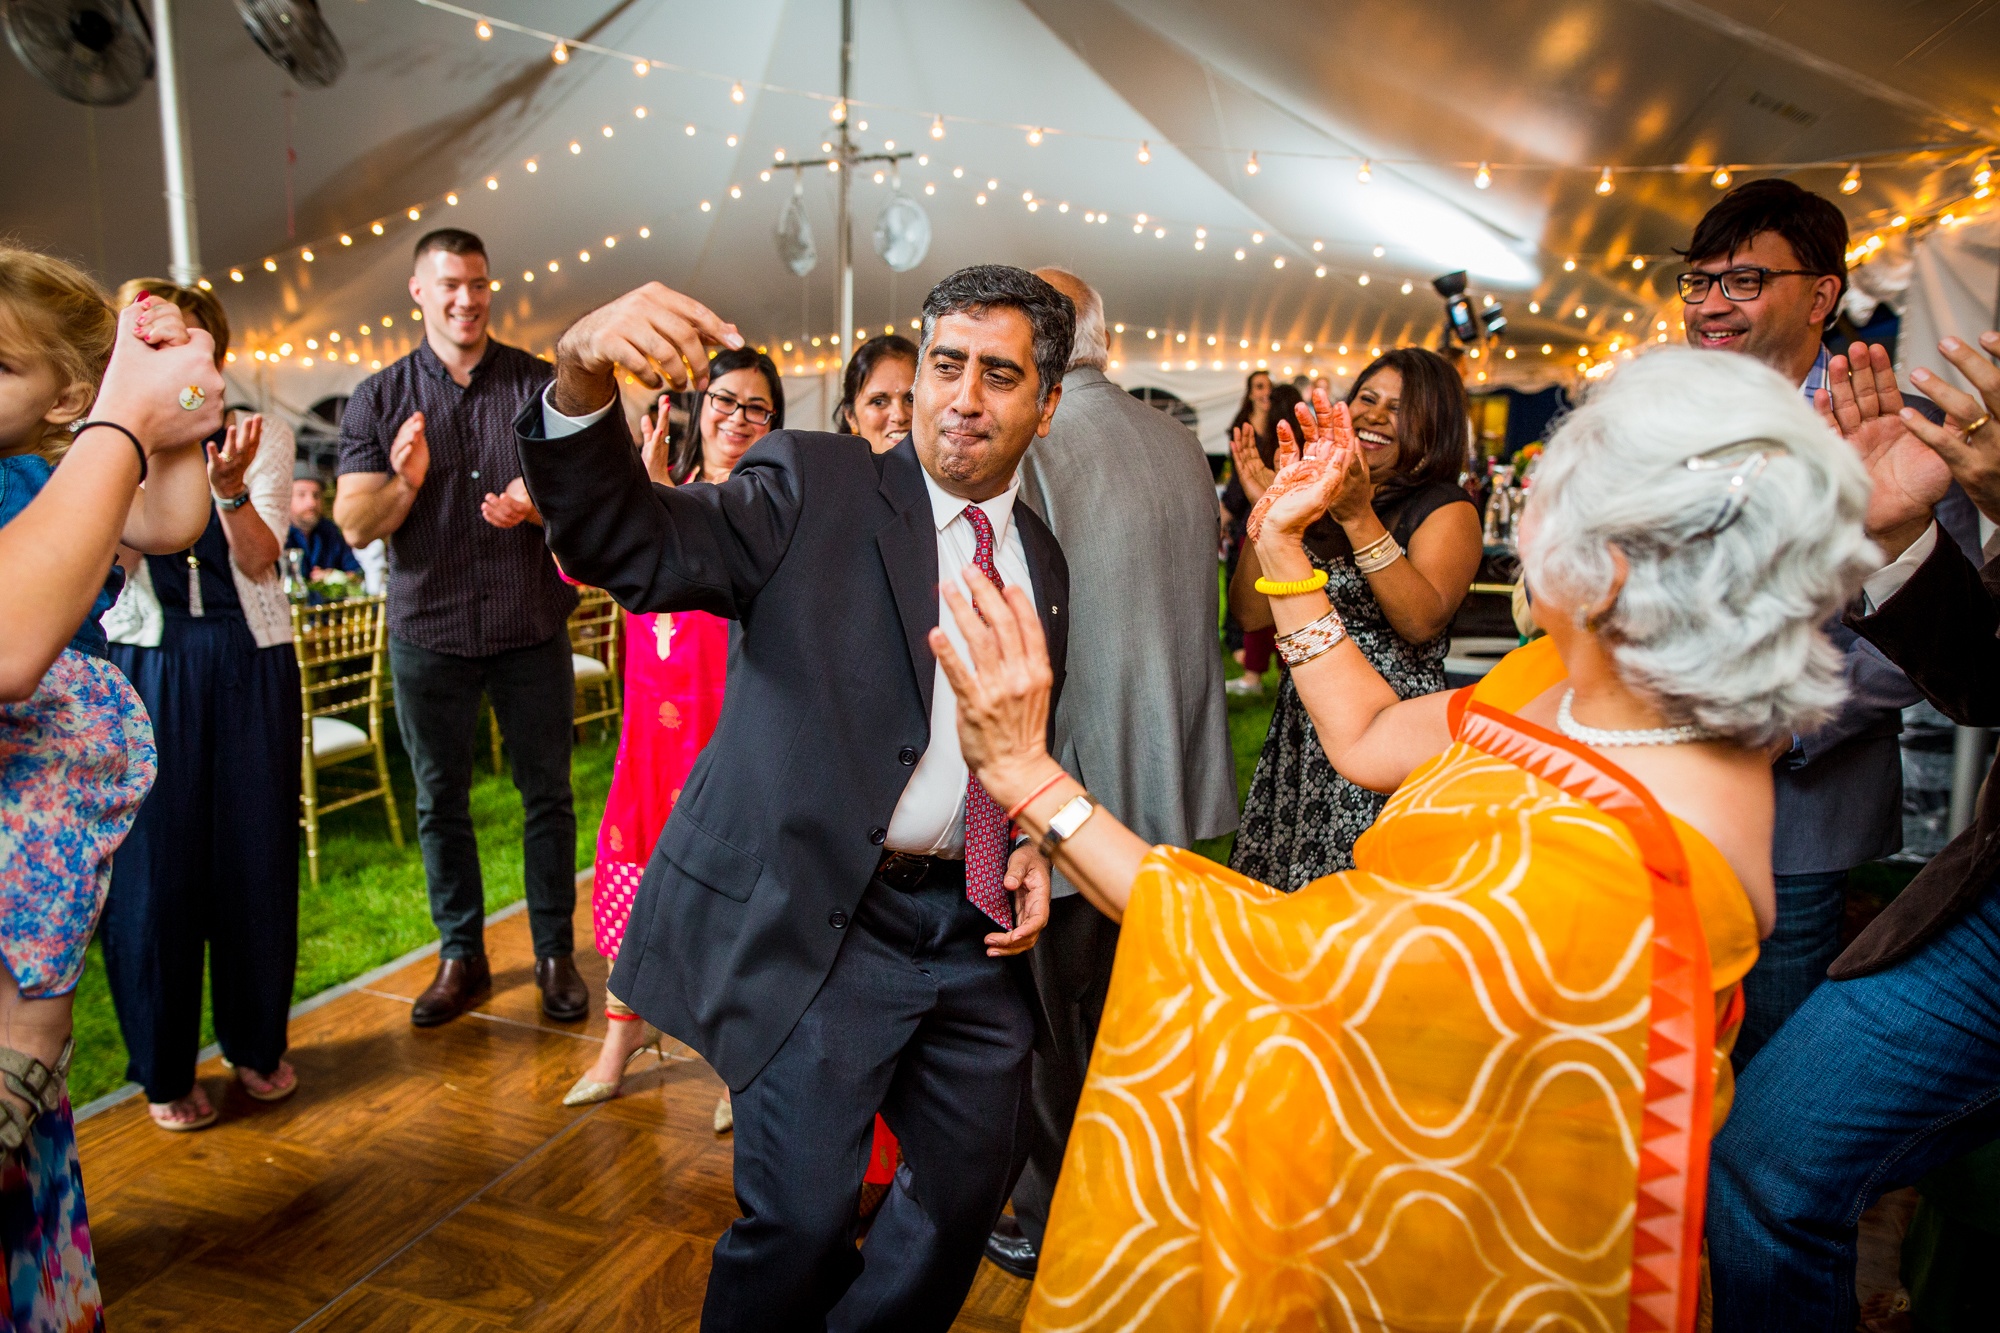 Guests dance together at a backyard wedding in Yorkville, Illinois